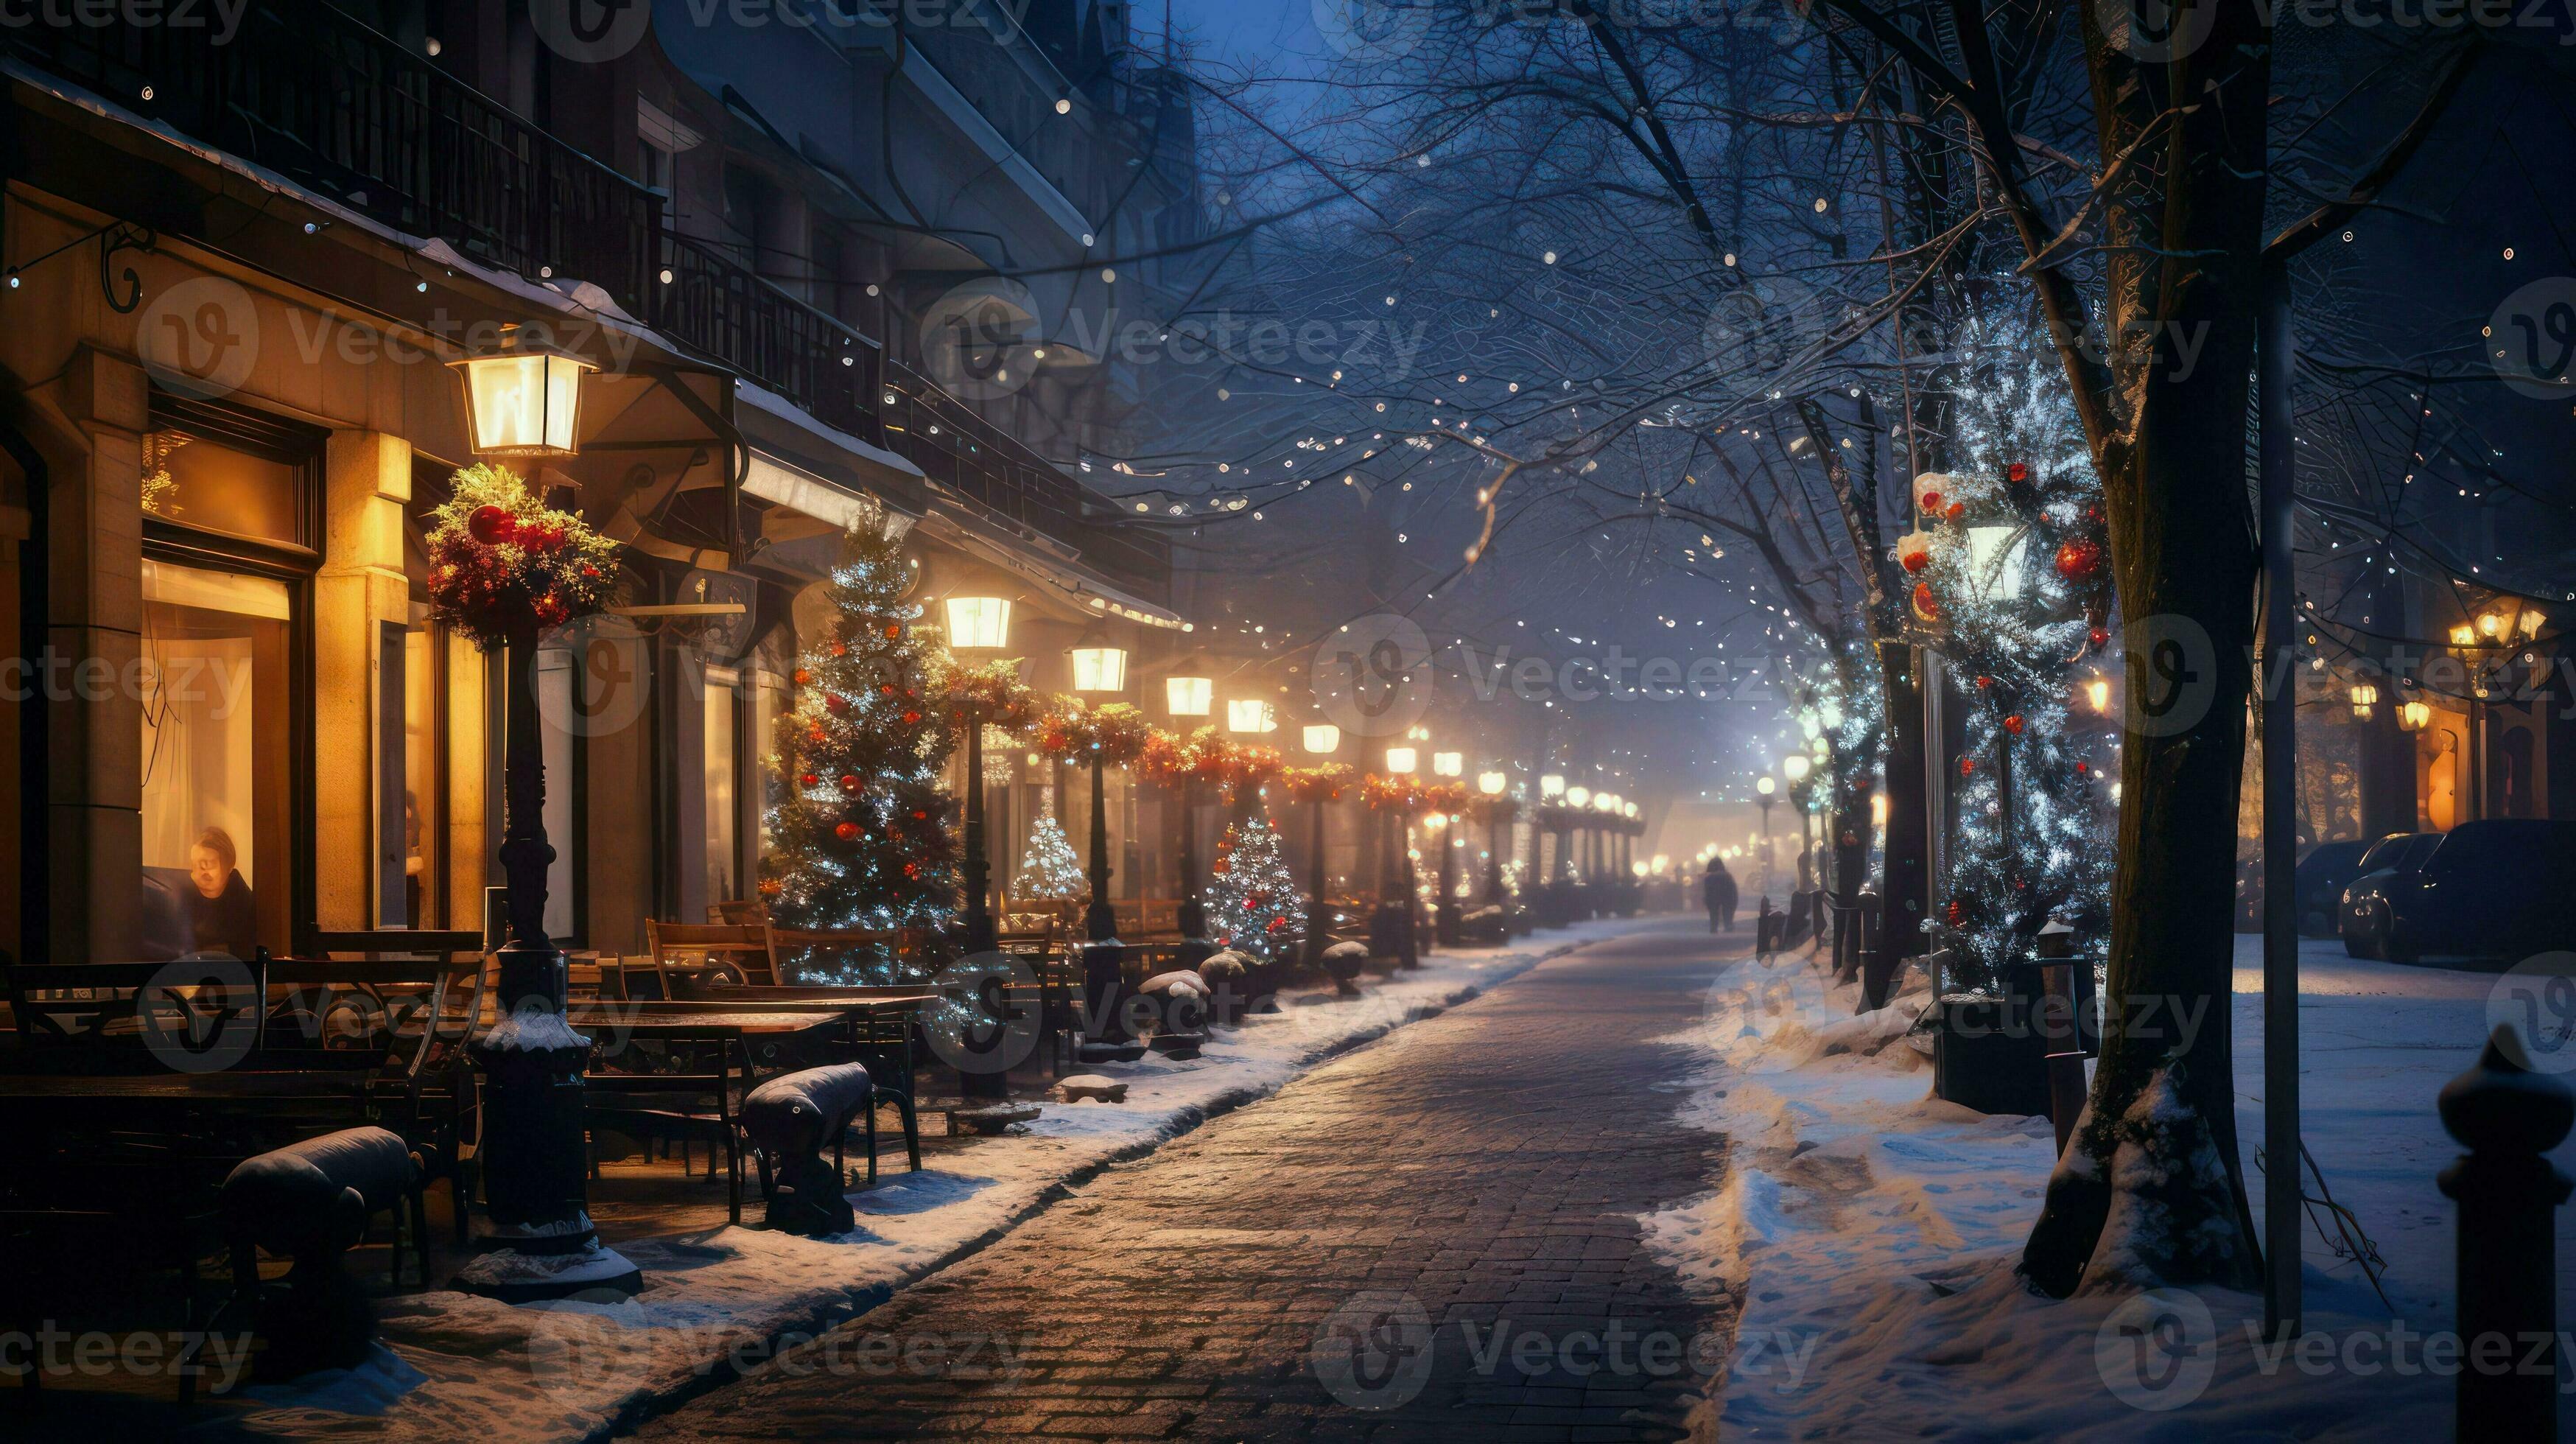 Winter city street at night with street lamps and trees covered